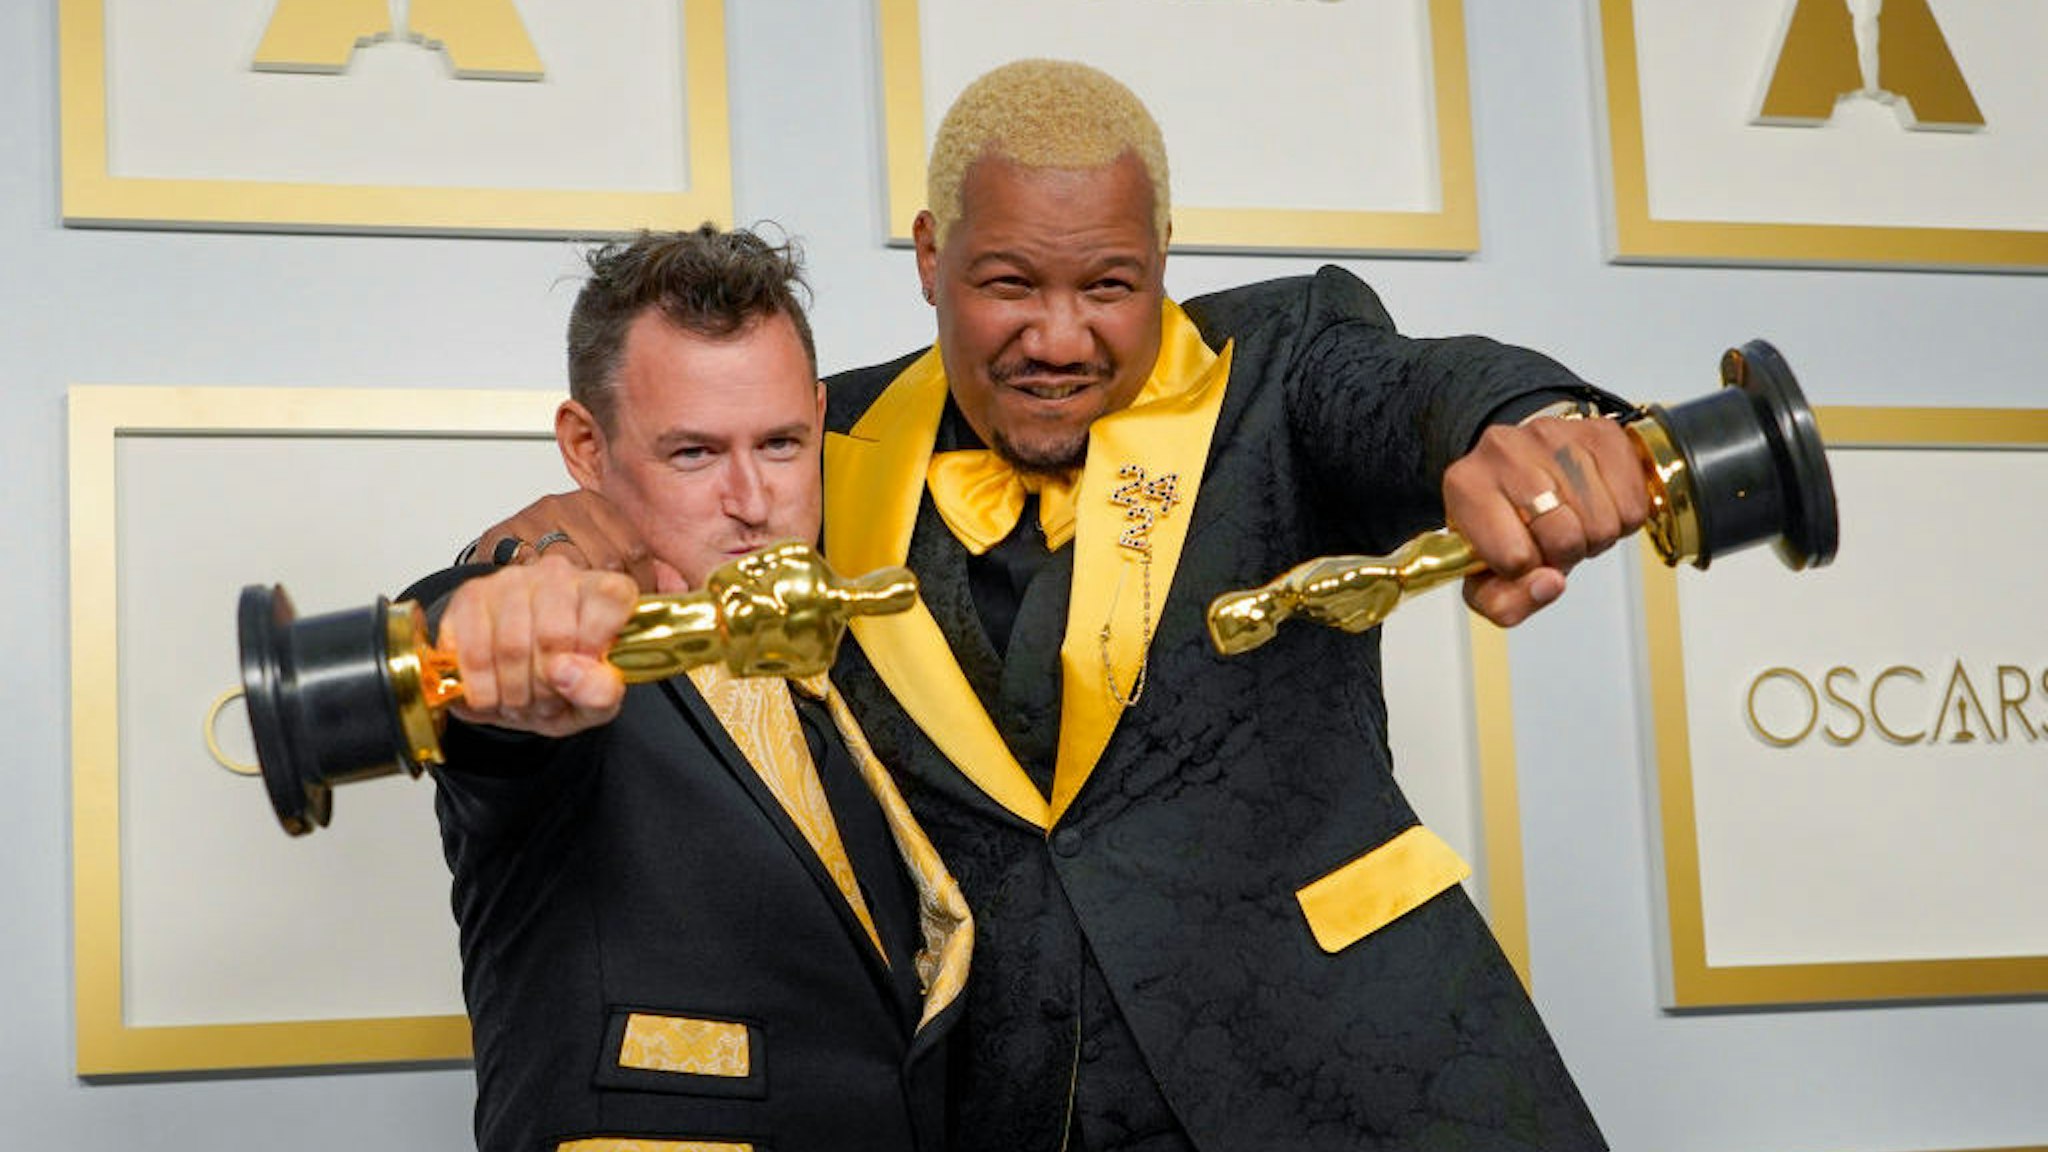 Martin Desmond Roe, left, and Travon Free, winners of the award for best live action short film for "Two Distant Strangers" pose in the press room at the Oscars on Sunday, April 25, 2021, at Union Station in Los Angeles. (AP Photo/Chris Pizzello, Pool)